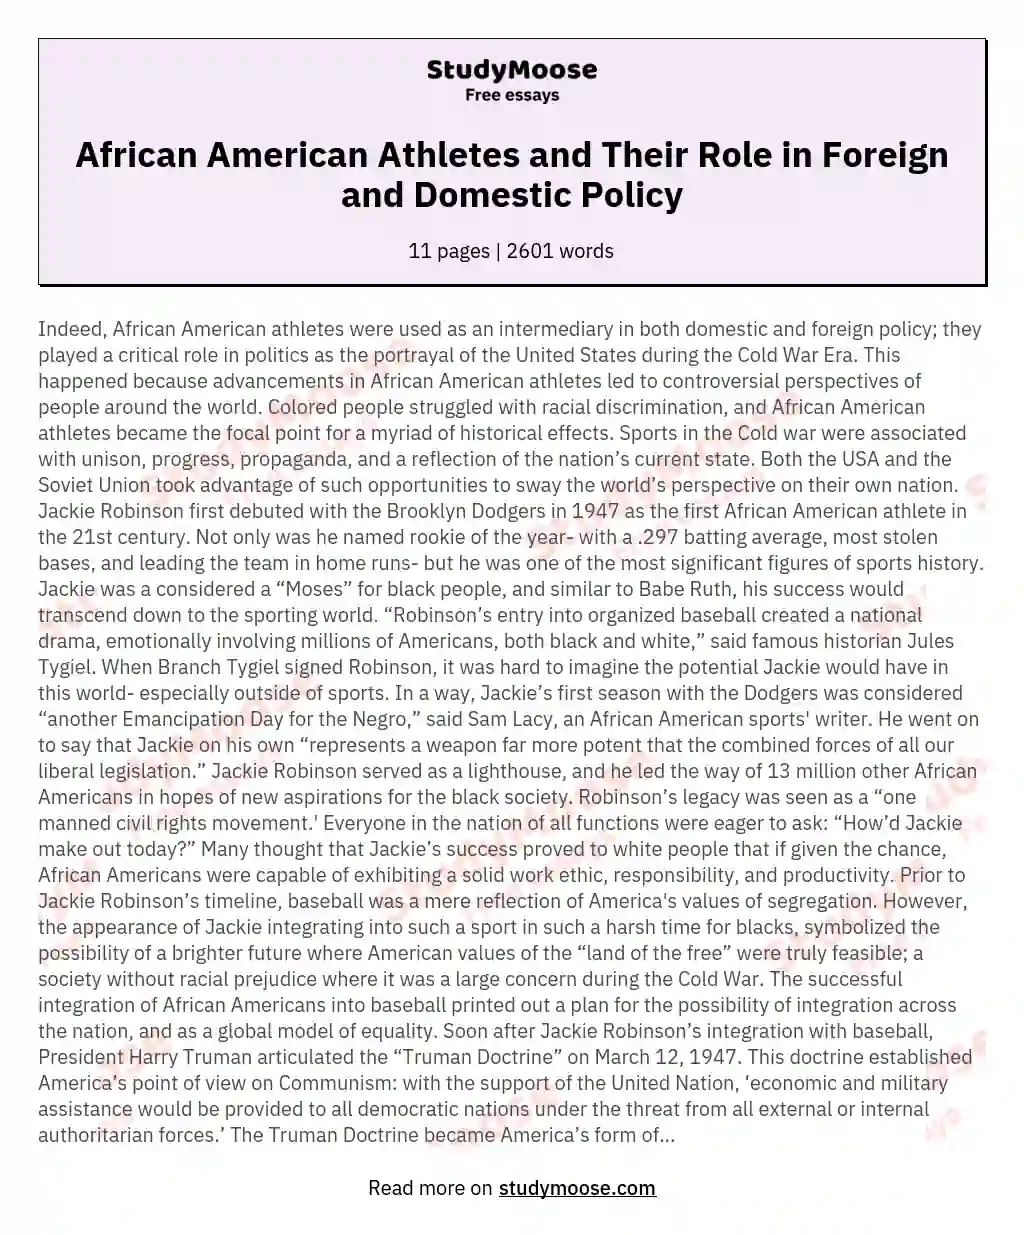 African American Athletes and Their Role in Foreign and Domestic Policy essay